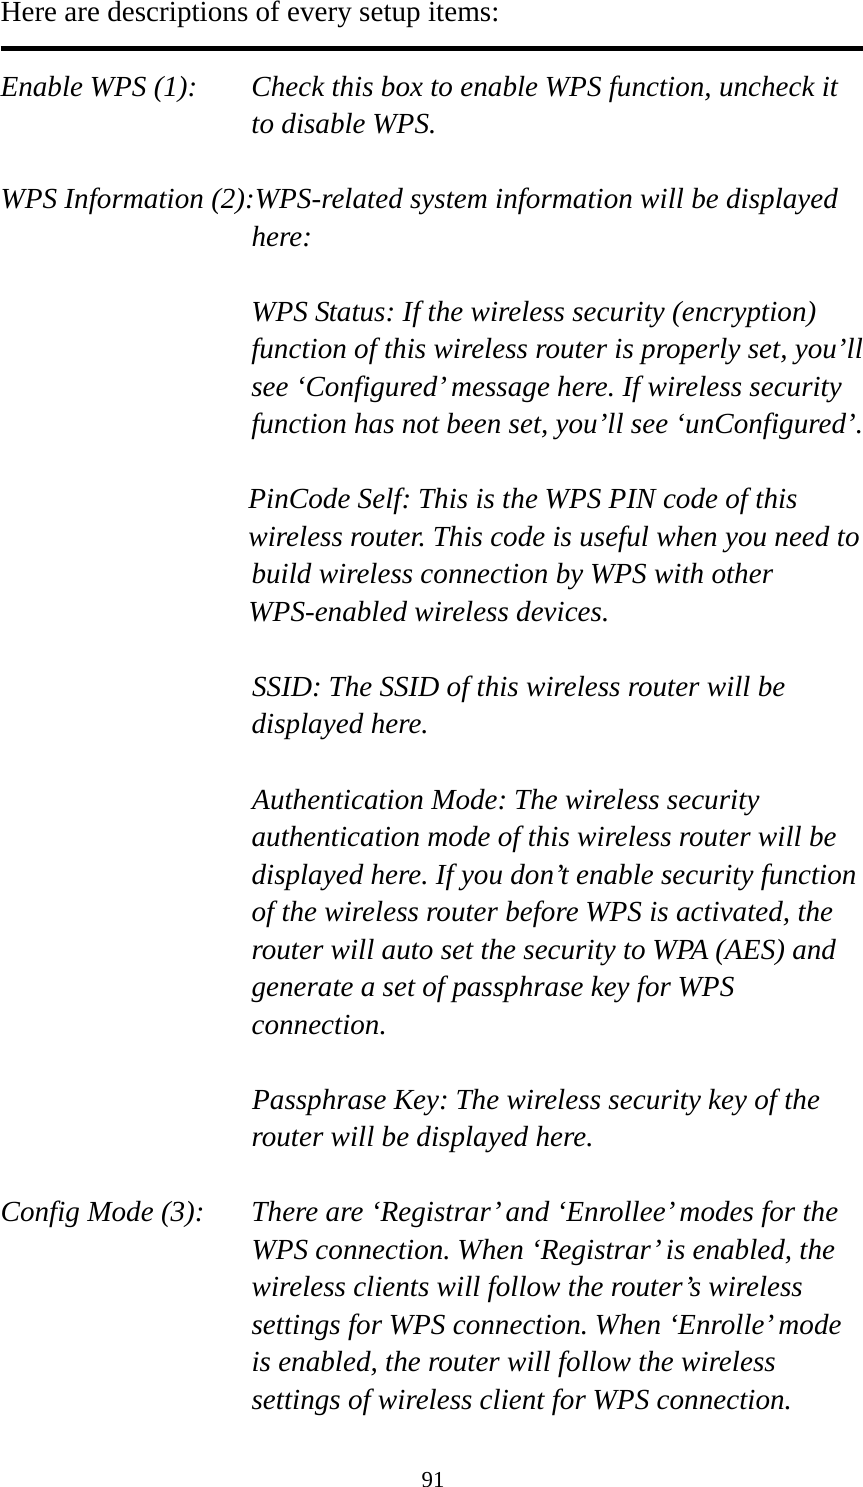 91 Here are descriptions of every setup items:  Enable WPS (1):  Check this box to enable WPS function, uncheck it to disable WPS.  WPS Information (2):WPS-related system information will be displayed here:  WPS Status: If the wireless security (encryption) function of this wireless router is properly set, you’ll see ‘Configured’ message here. If wireless security function has not been set, you’ll see ‘unConfigured’.  PinCode Self: This is the WPS PIN code of this wireless router. This code is useful when you need to  build wireless connection by WPS with other WPS-enabled wireless devices.  SSID: The SSID of this wireless router will be displayed here.  Authentication Mode: The wireless security authentication mode of this wireless router will be displayed here. If you don’t enable security function of the wireless router before WPS is activated, the router will auto set the security to WPA (AES) and generate a set of passphrase key for WPS connection.  Passphrase Key: The wireless security key of the router will be displayed here.  Config Mode (3):  There are ‘Registrar’ and ‘Enrollee’ modes for the WPS connection. When ‘Registrar’ is enabled, the wireless clients will follow the router’s wireless settings for WPS connection. When ‘Enrolle’ mode is enabled, the router will follow the wireless settings of wireless client for WPS connection. 